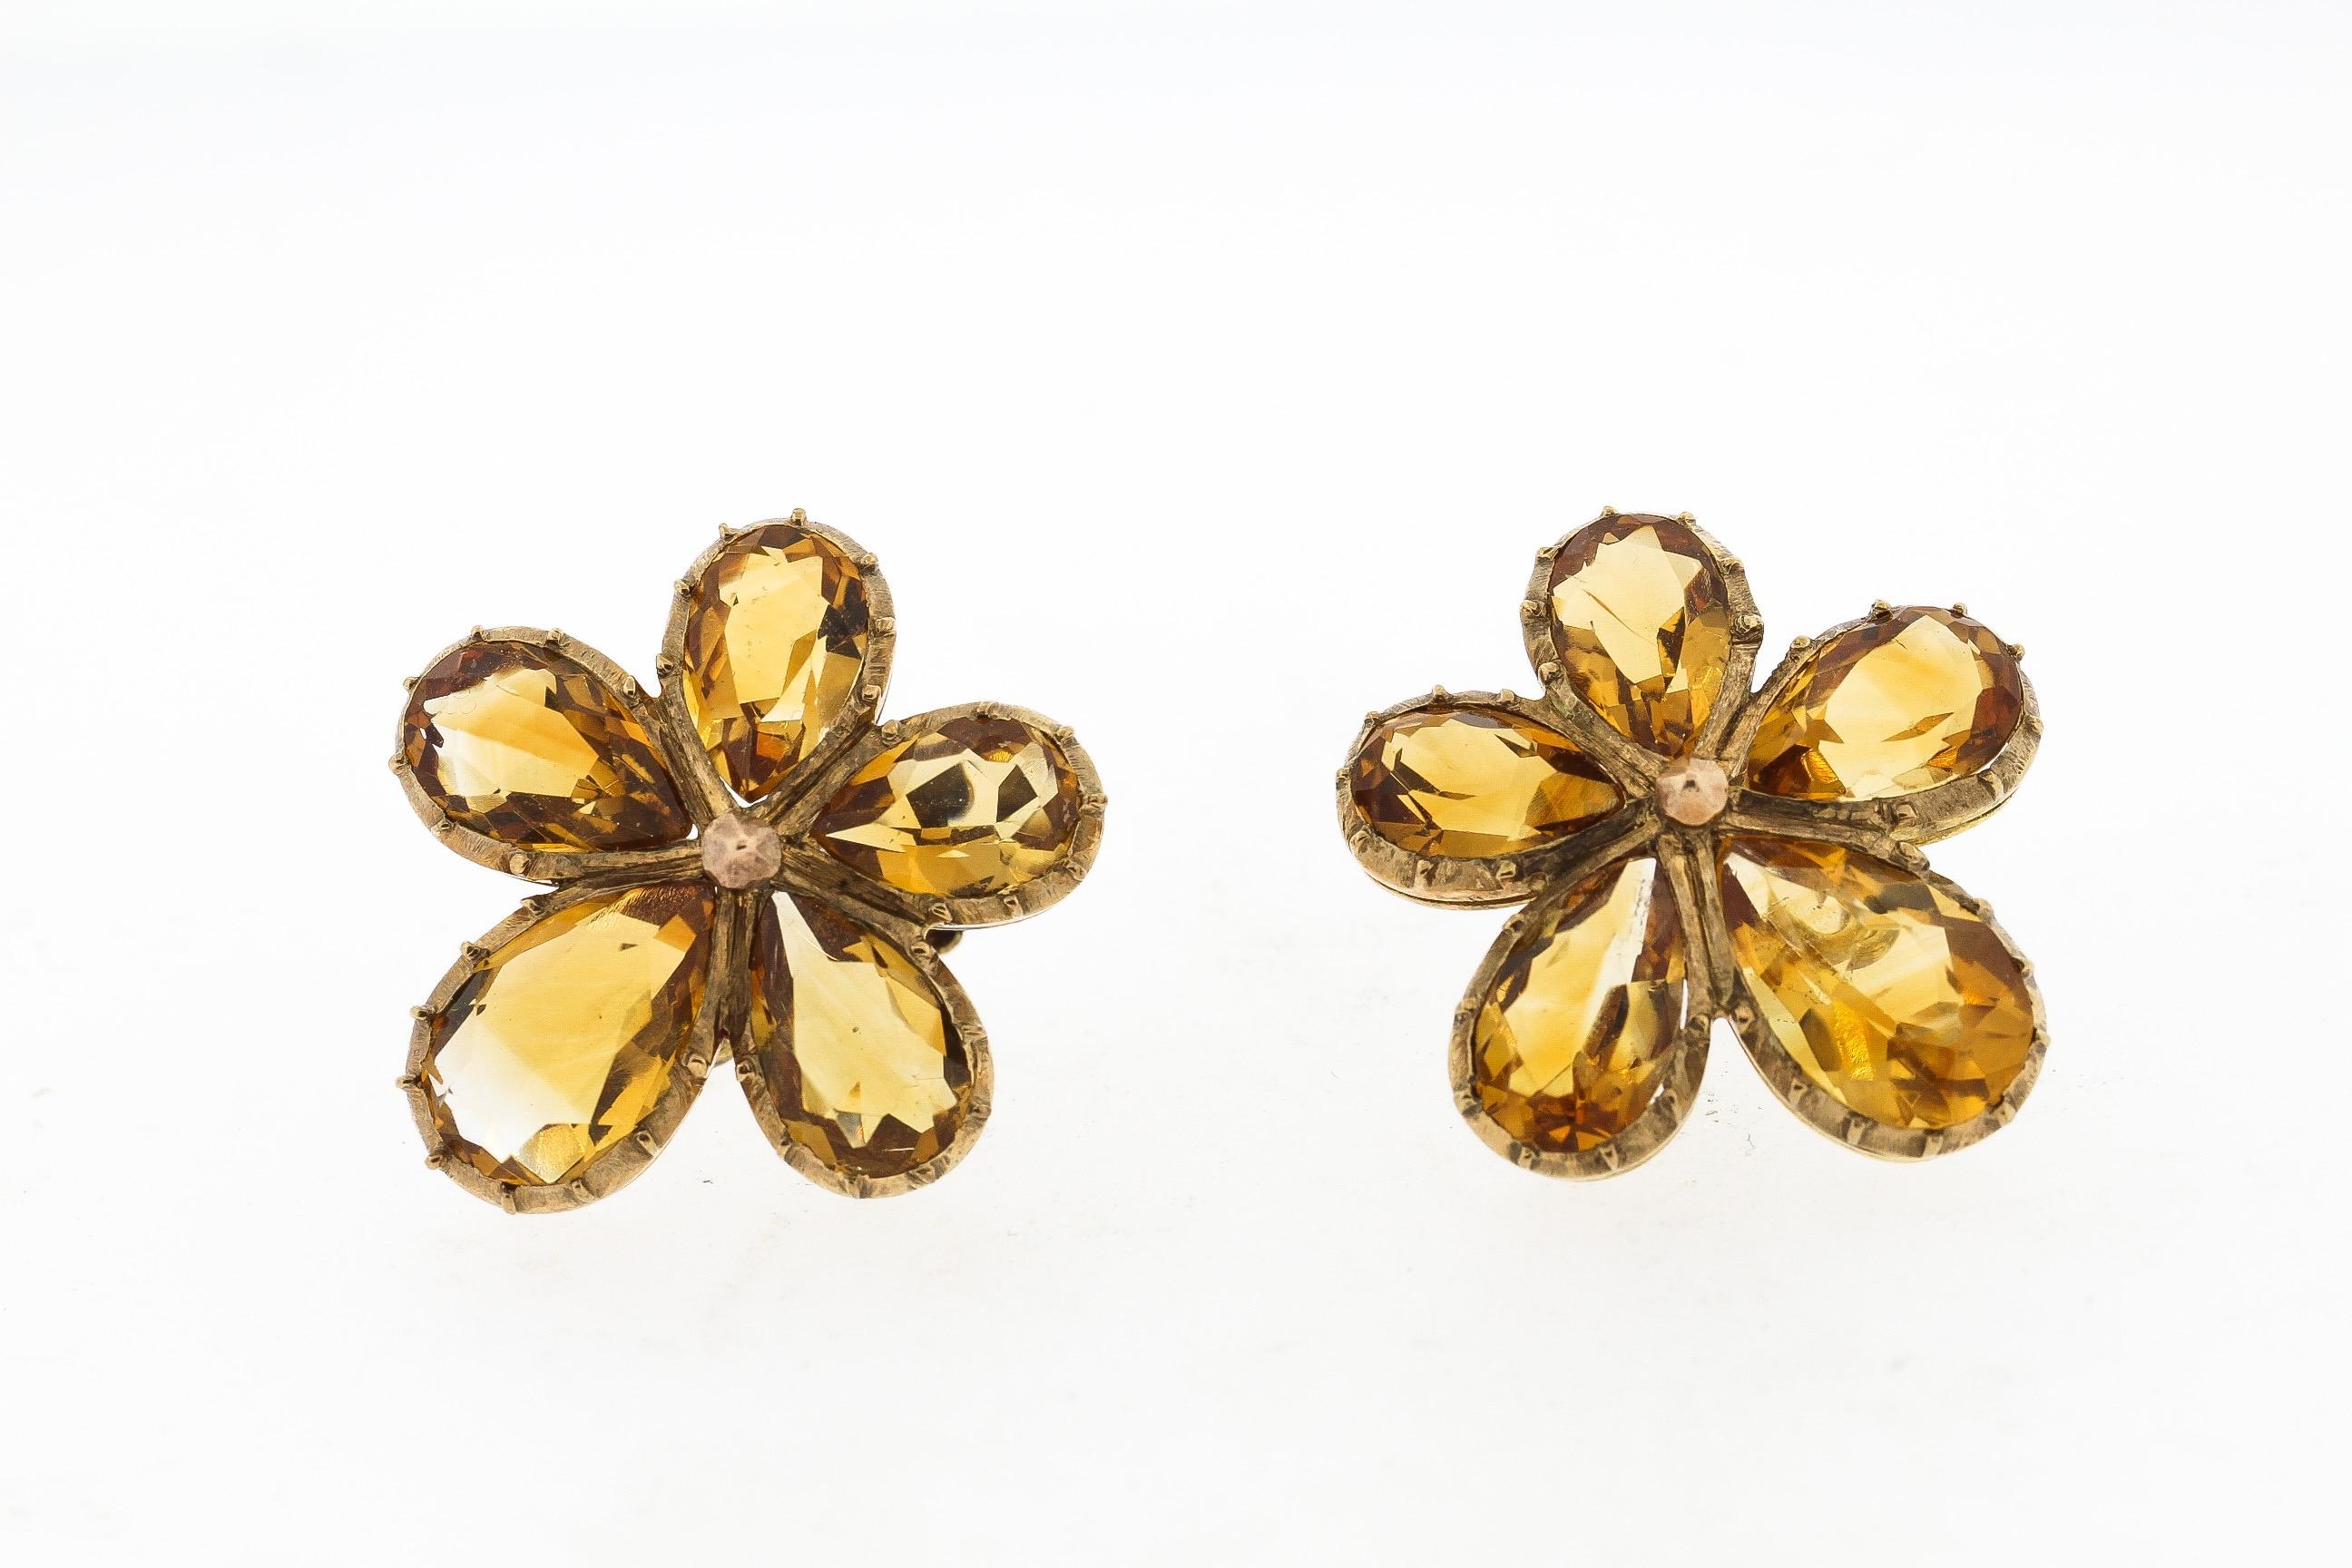 Antique 9k yellow gold earrings set with 5 pear shape vitrines two form a pansy shaped flower. The yellow of the citrine is bright. The earring backs are stamped 9k and are screw backs. They can be easily converted to hang from a wire. The earrings